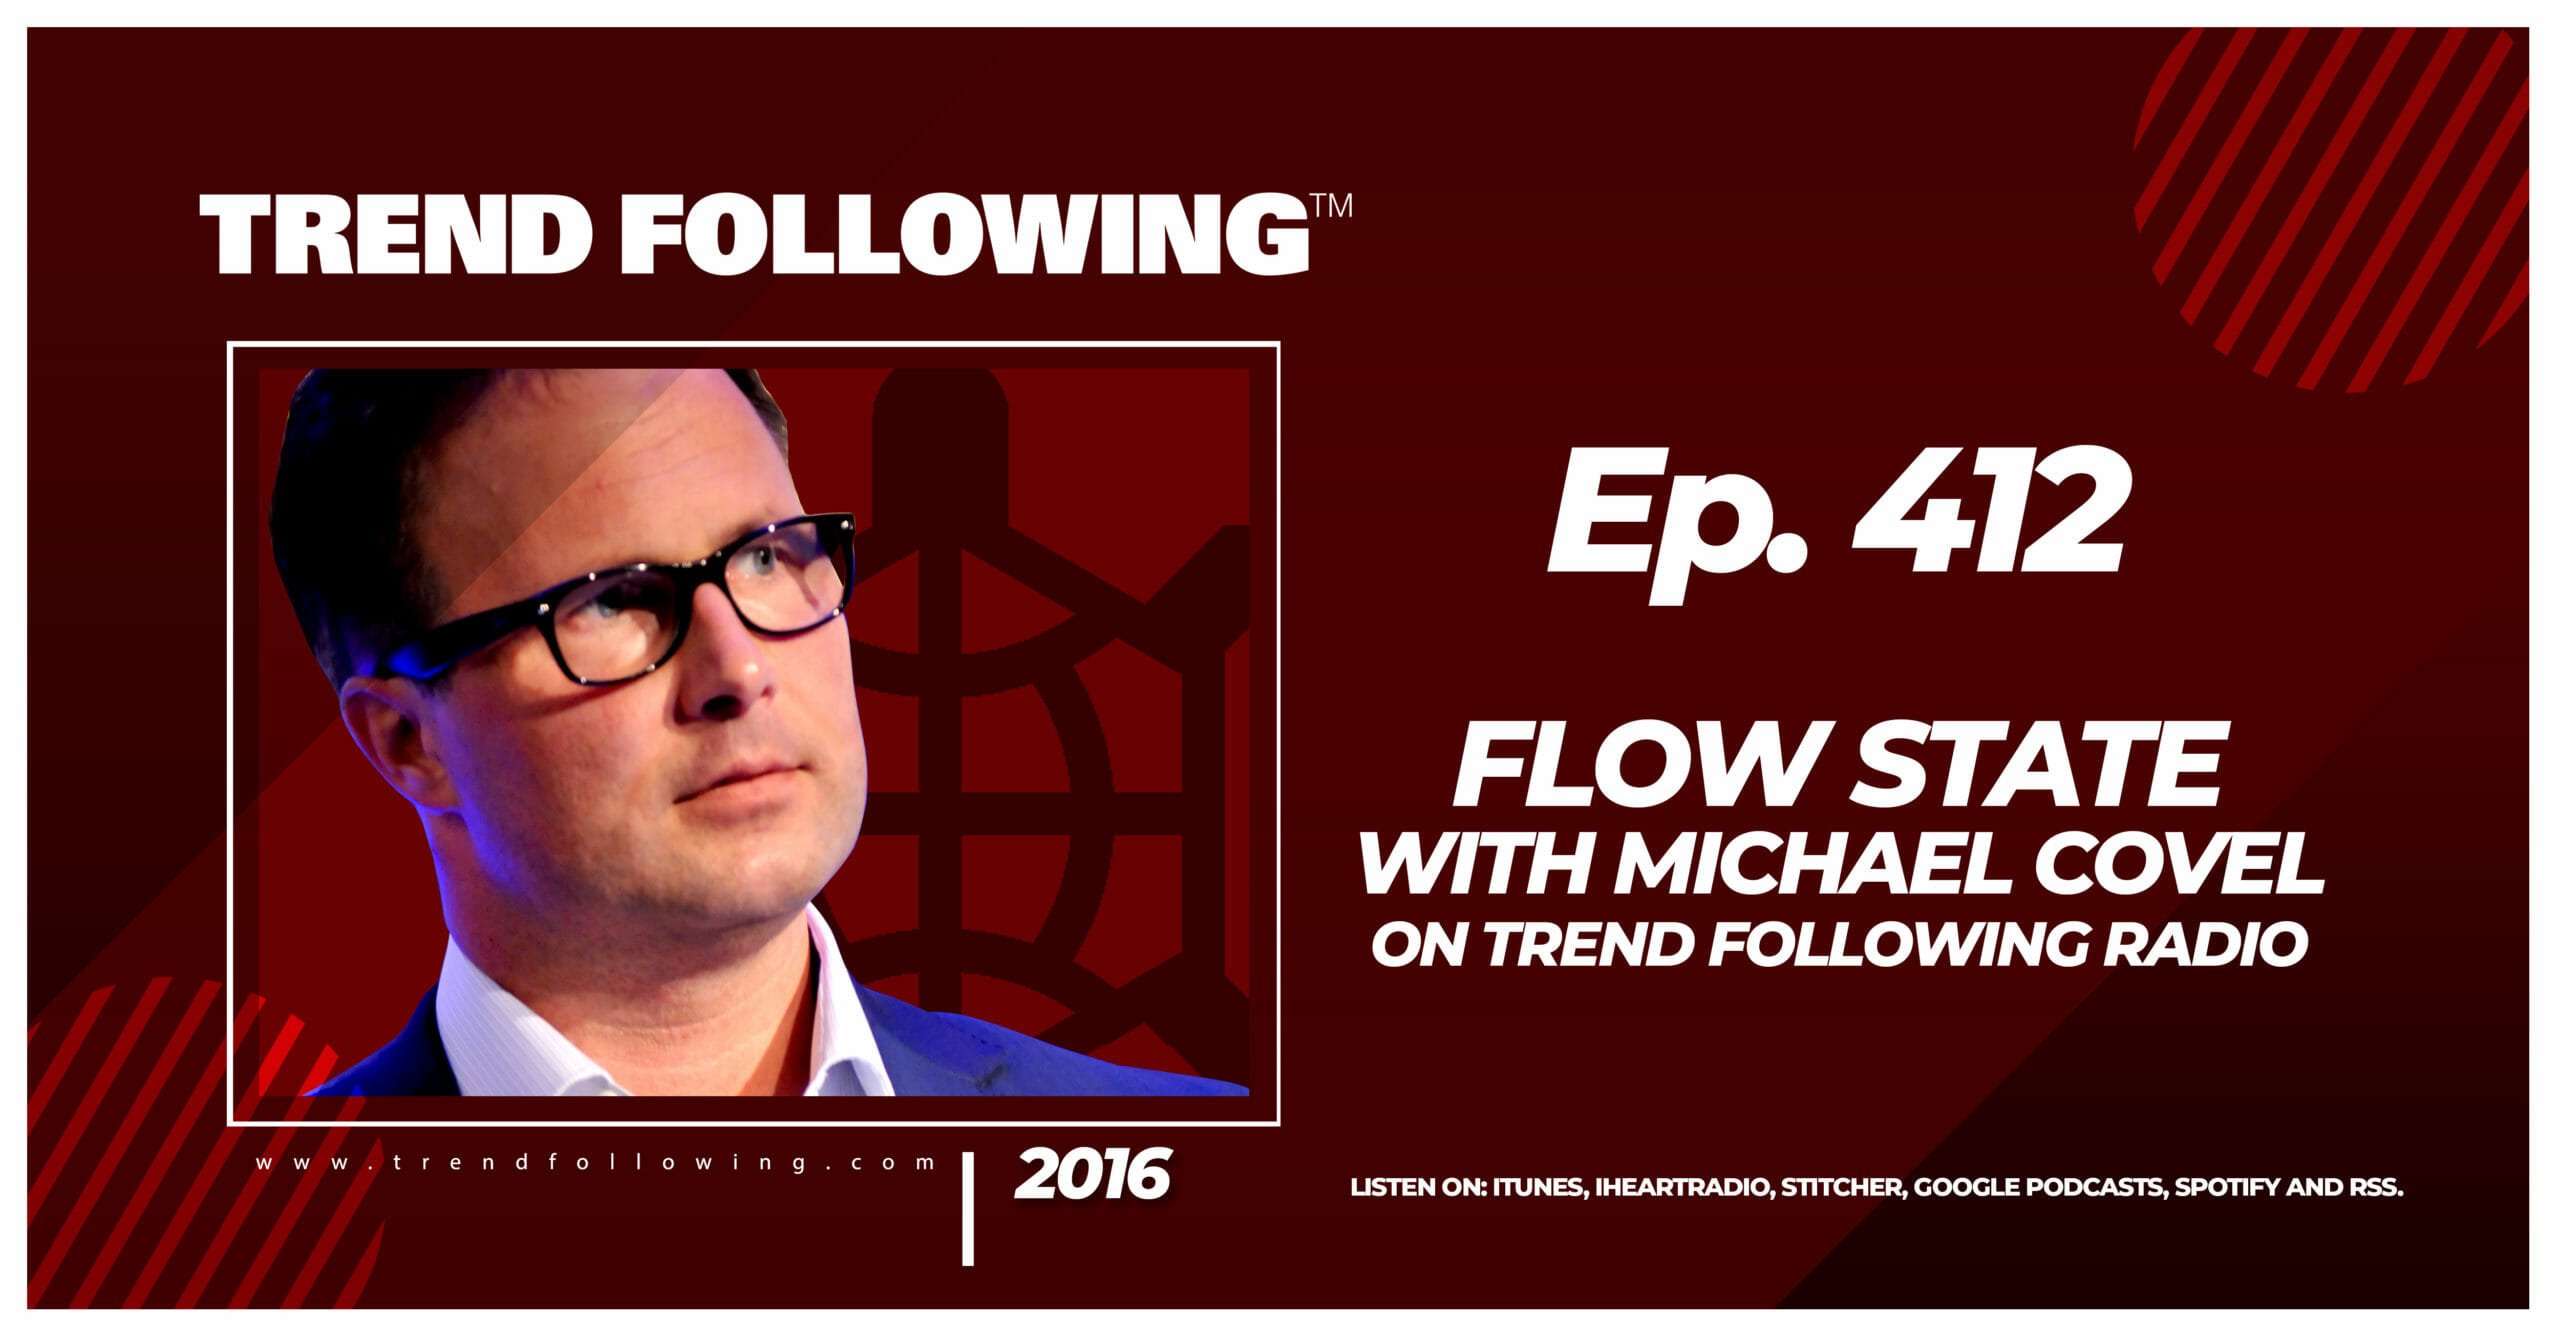 Flow State with Michael Covel on Trend Following Radio